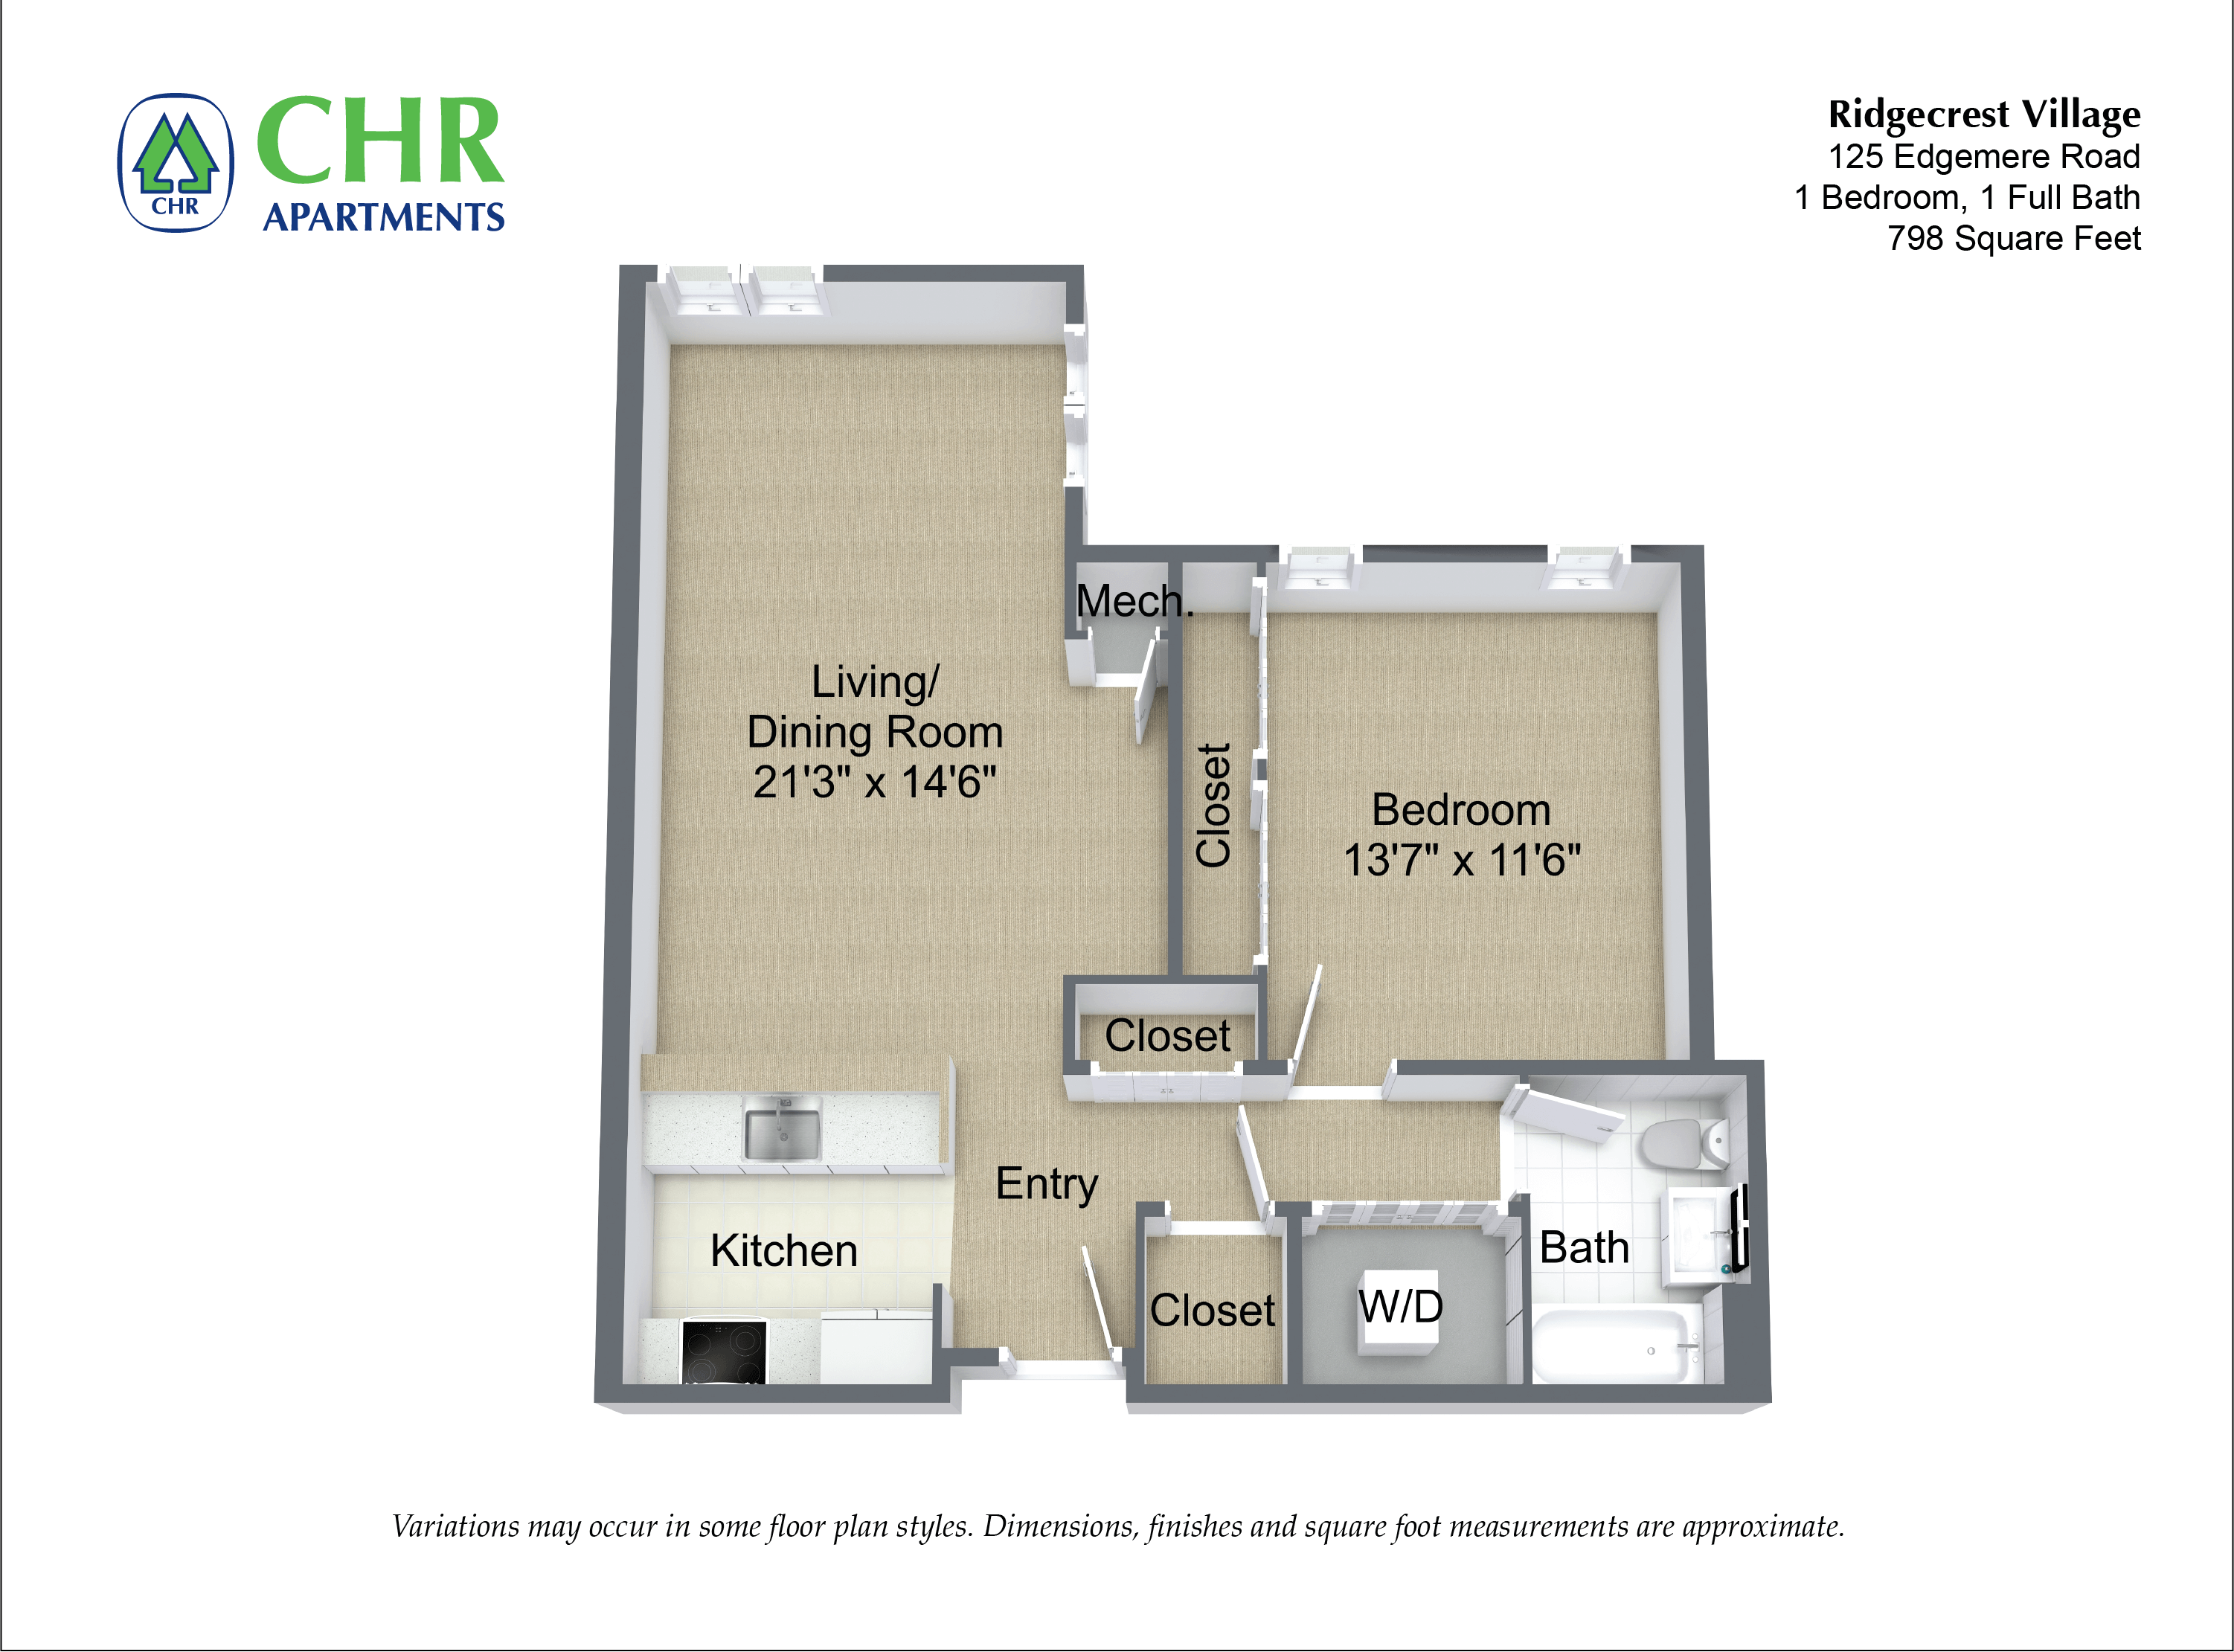 Click to view 1 Bed/1 Bath - Edgemere floor plan gallery